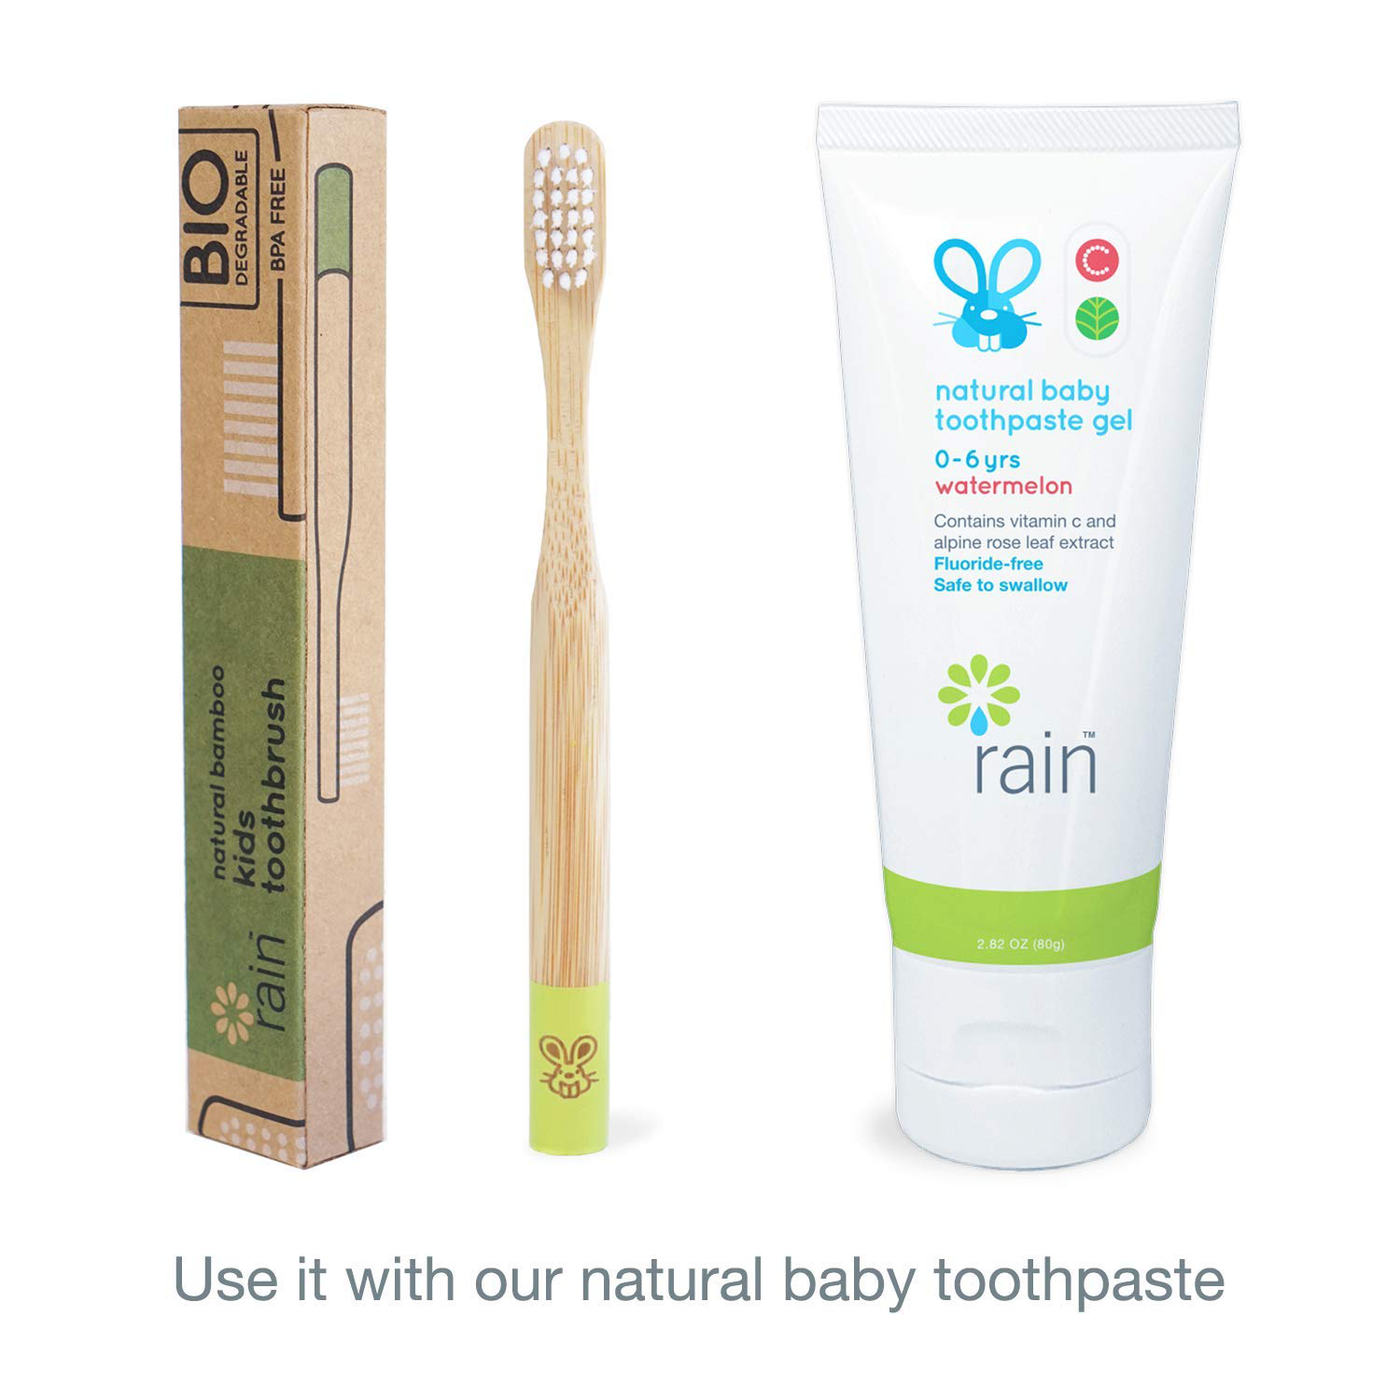 Rain Organic Bamboo Baby Toothbrush - 100% Safe Infant Toddler Kids Toothbrush 6 to 12 Months and Up, Natural BPA-Free Biodegradable Wood Toothbrush Extra Soft Bristles Children's Dental Care (1 Pack)